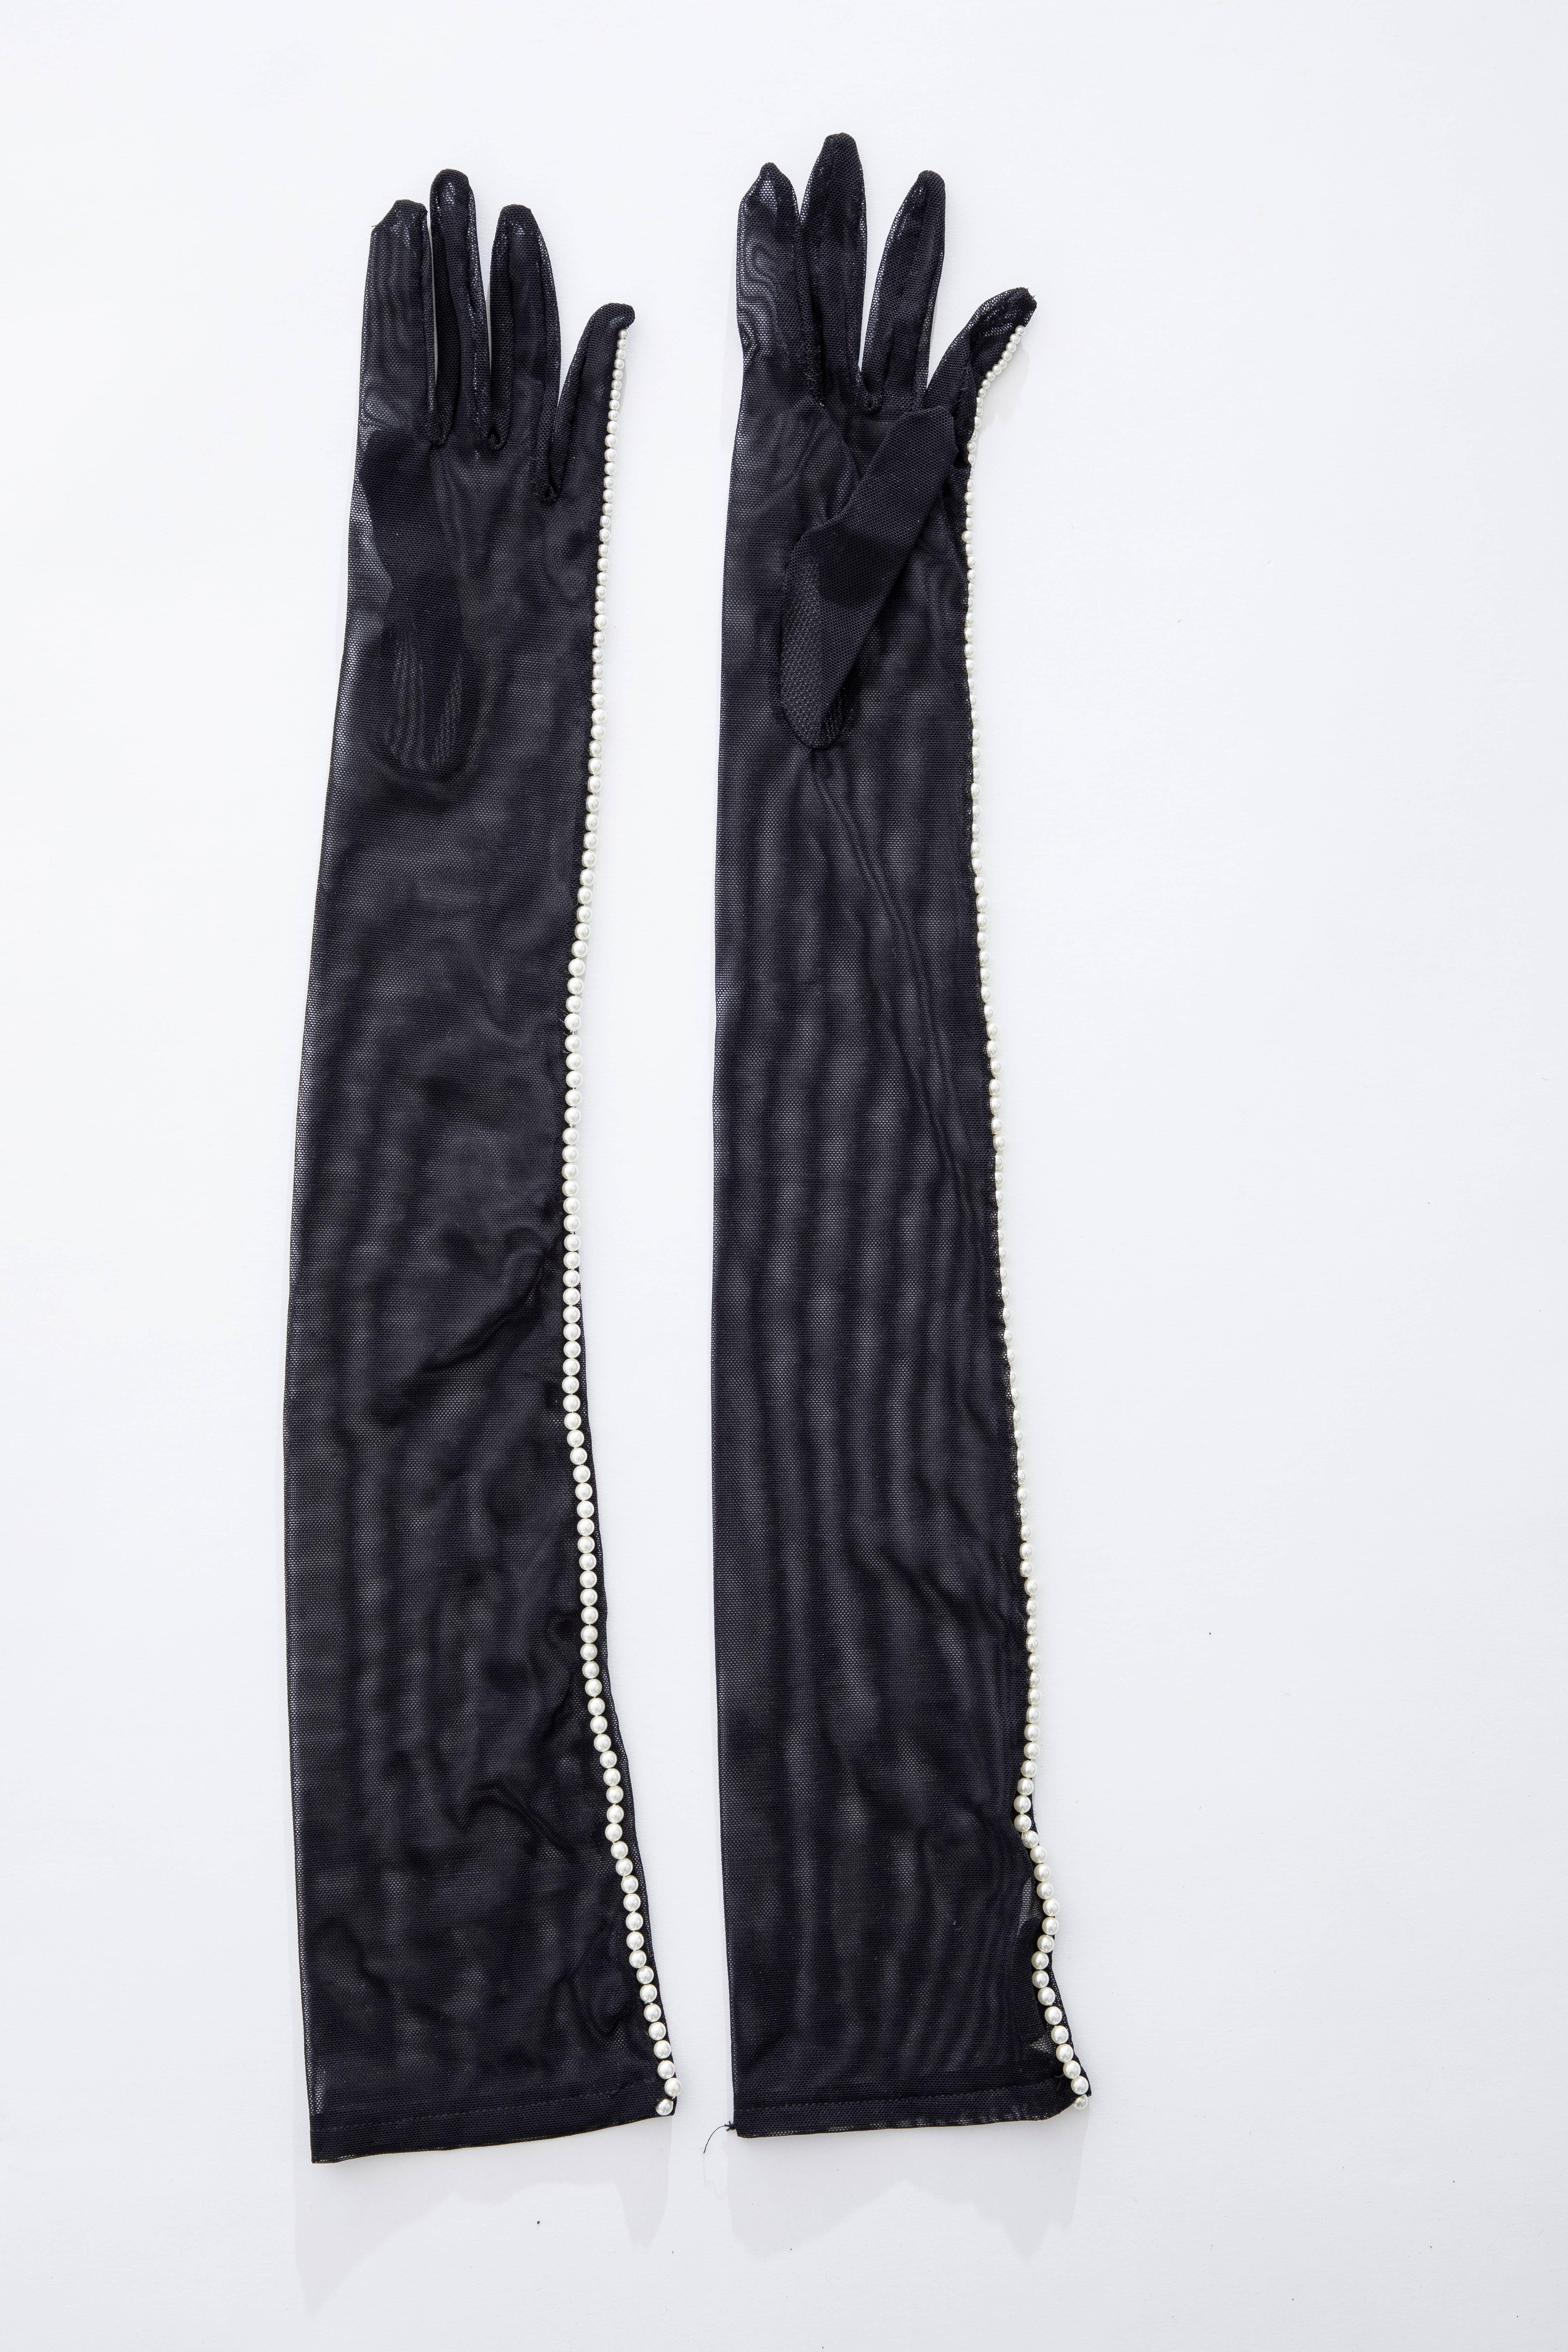 Black Dries Van Noten mesh long gloves with faux pearl embellishments. 
Includes box.

Small - Length: 23, Width 4.5
